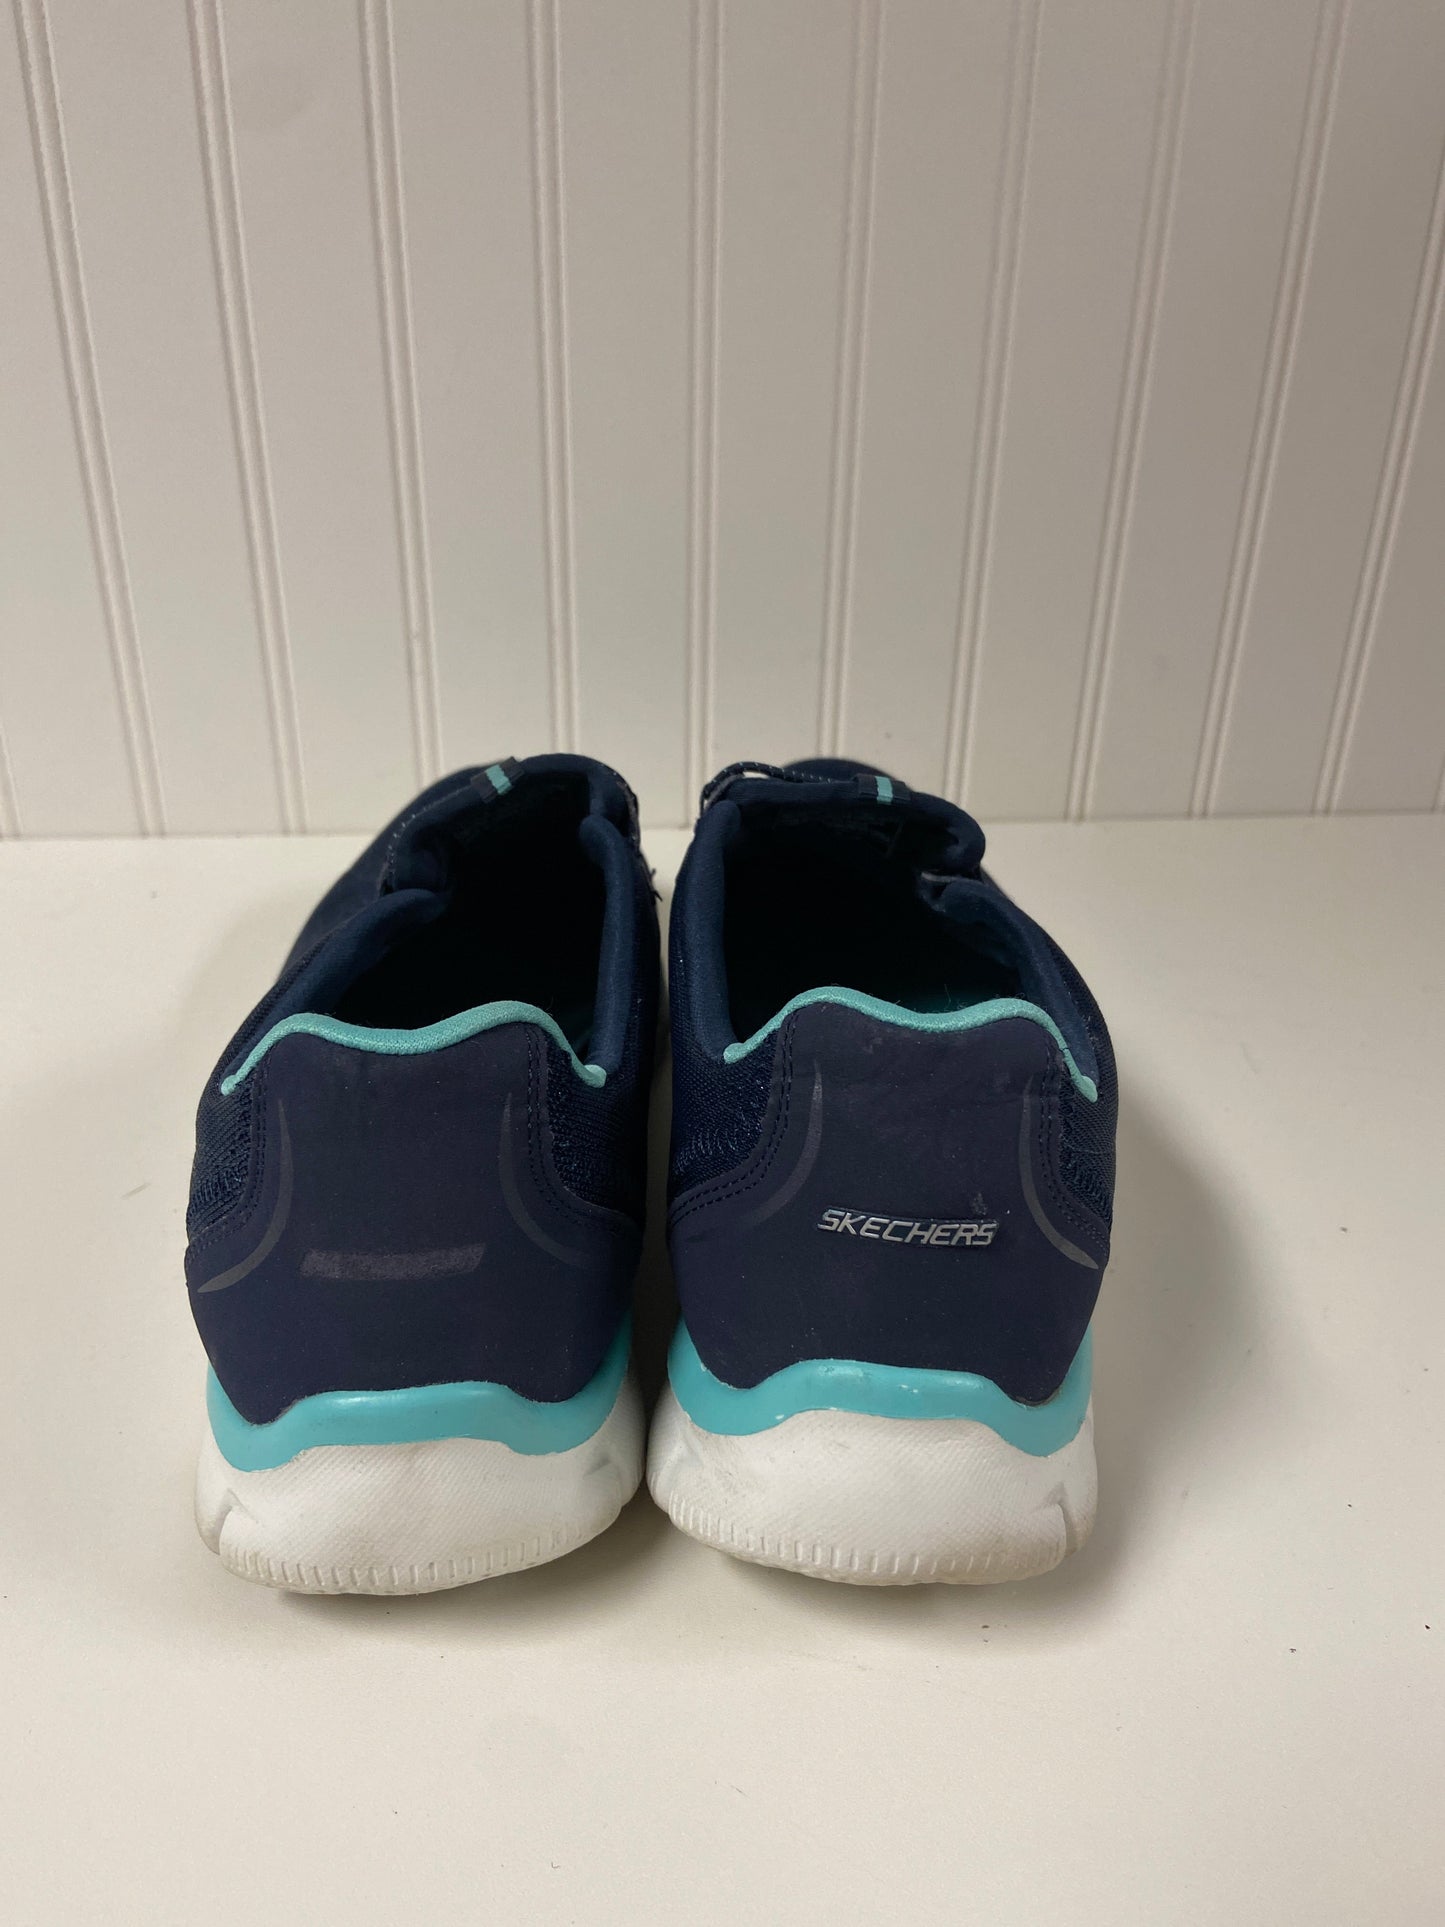 Navy Shoes Athletic Skechers, Size 11